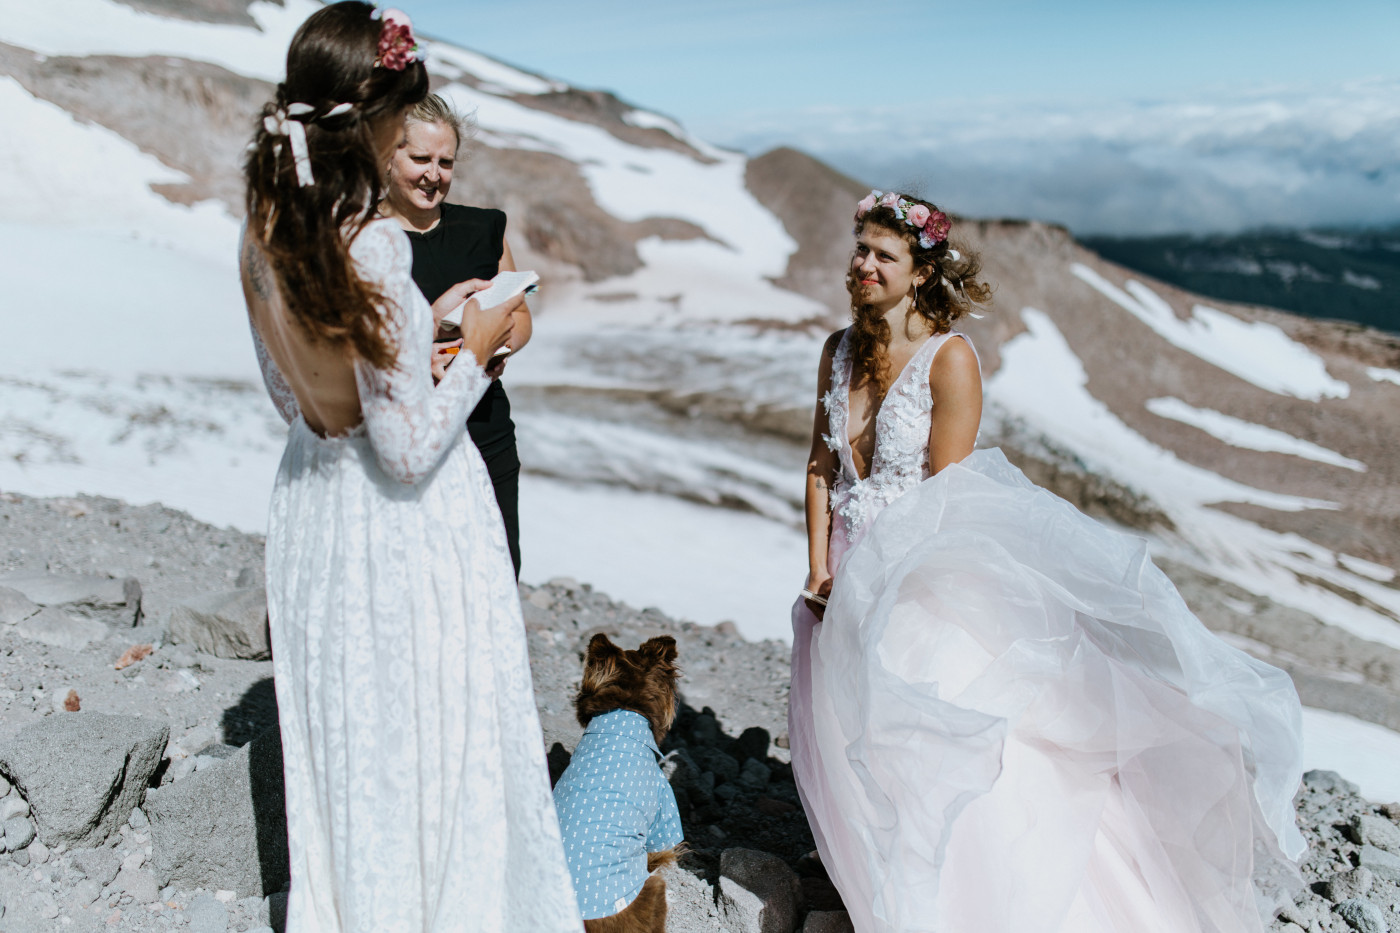 Margaux and Heather reading vows during their elopement. Elopement photography at Mount Hood by Sienna Plus Josh.